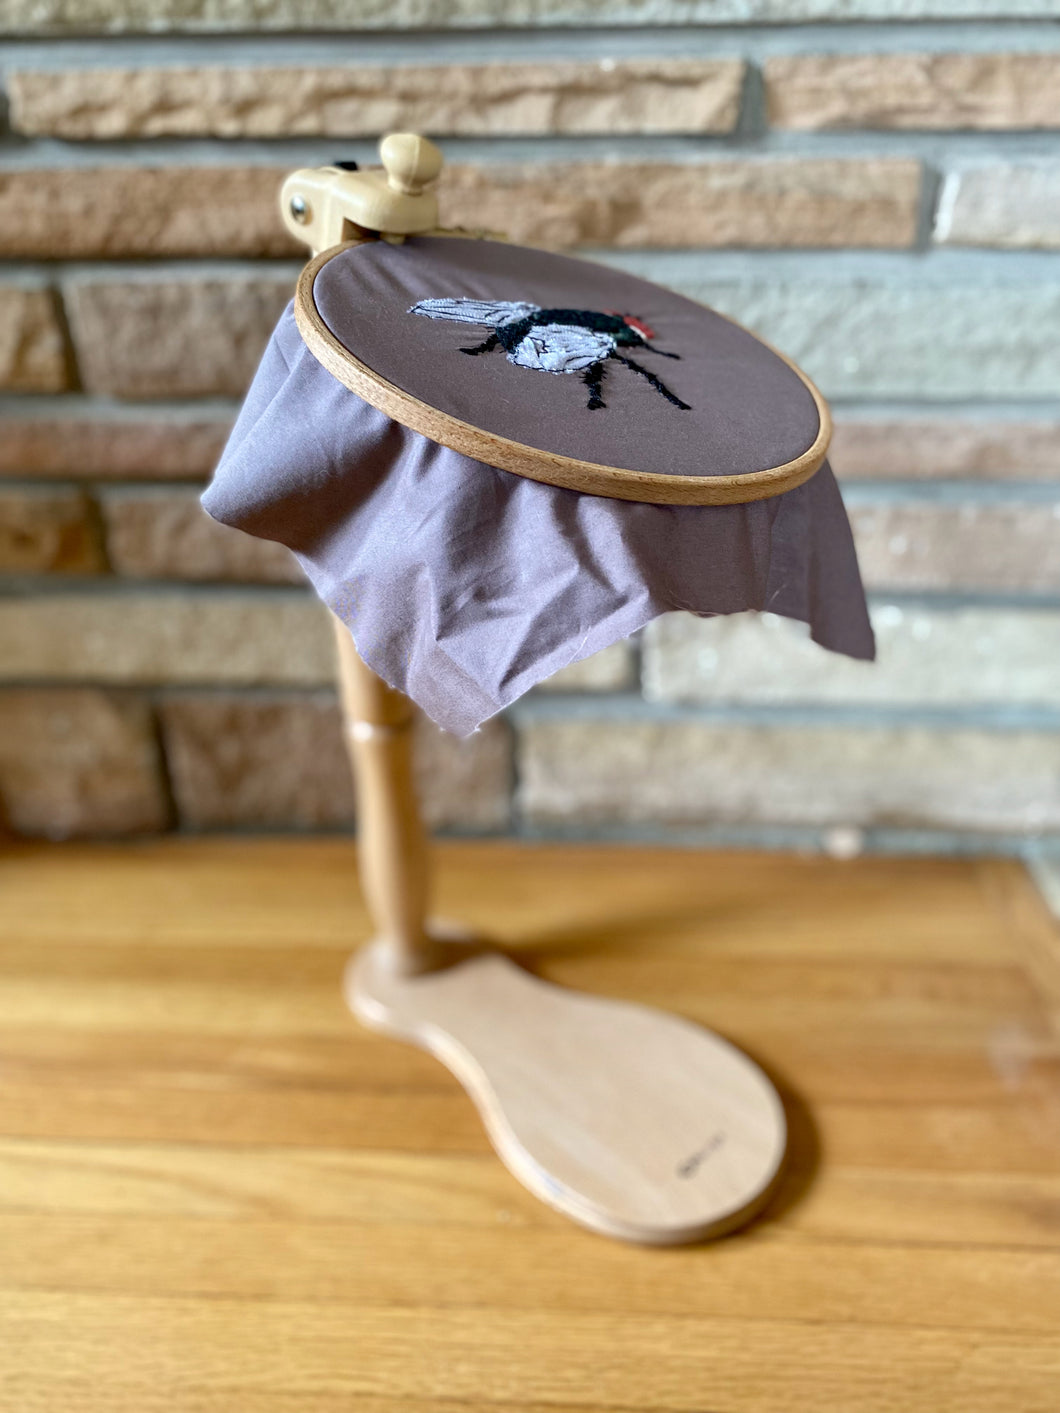 The Seat Embroidery Stand